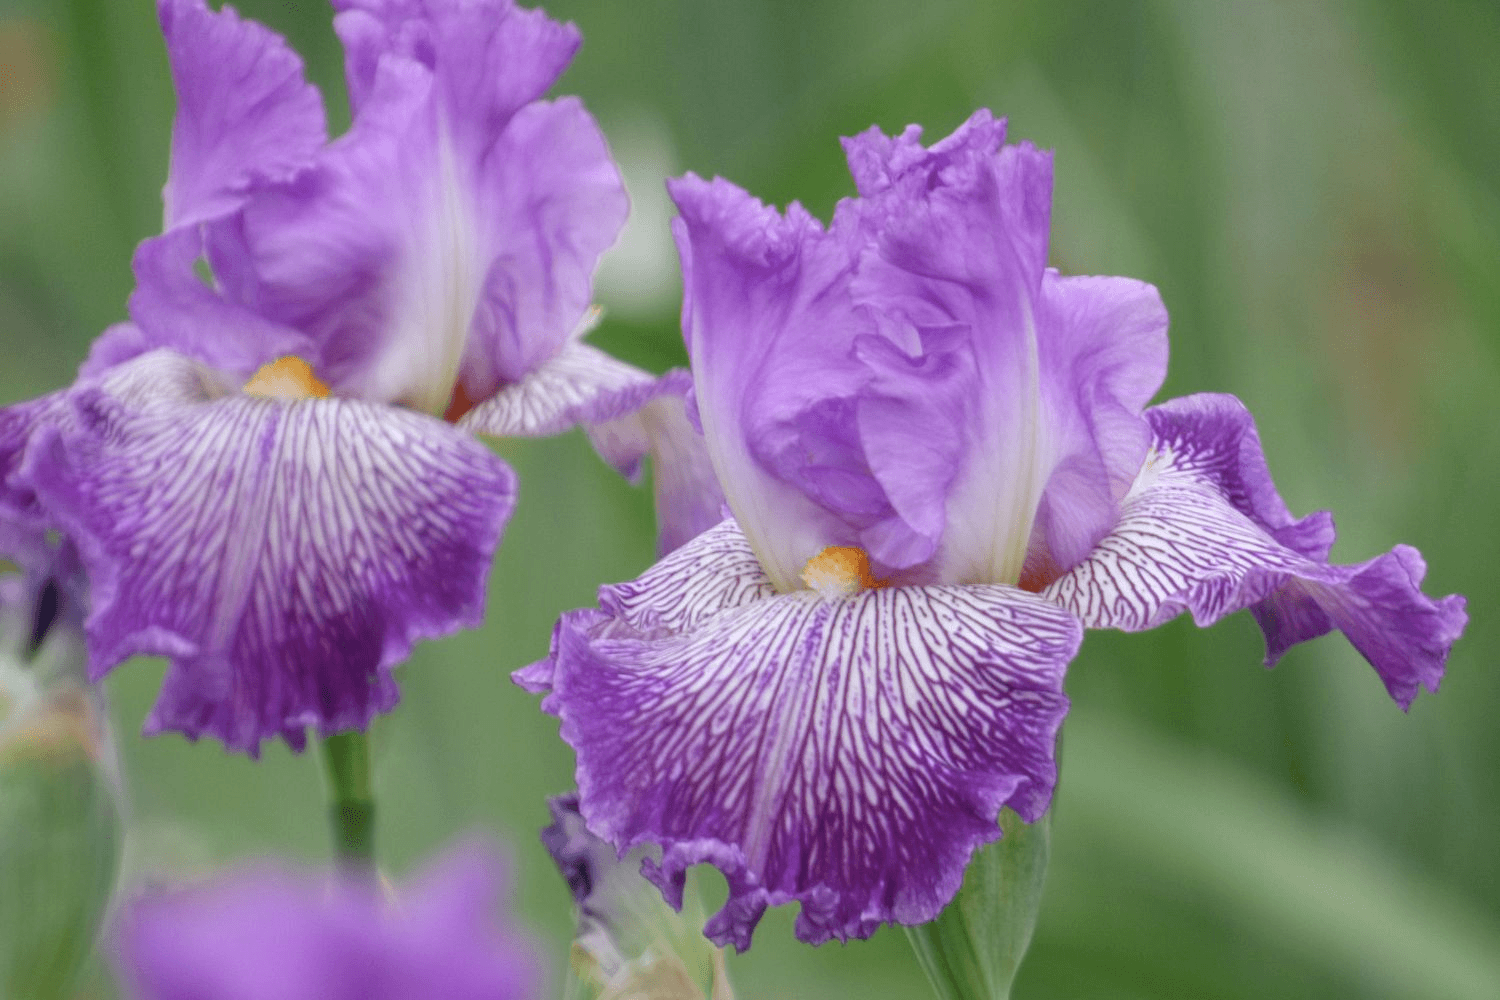 How To Grow And Care For Bearded Iris